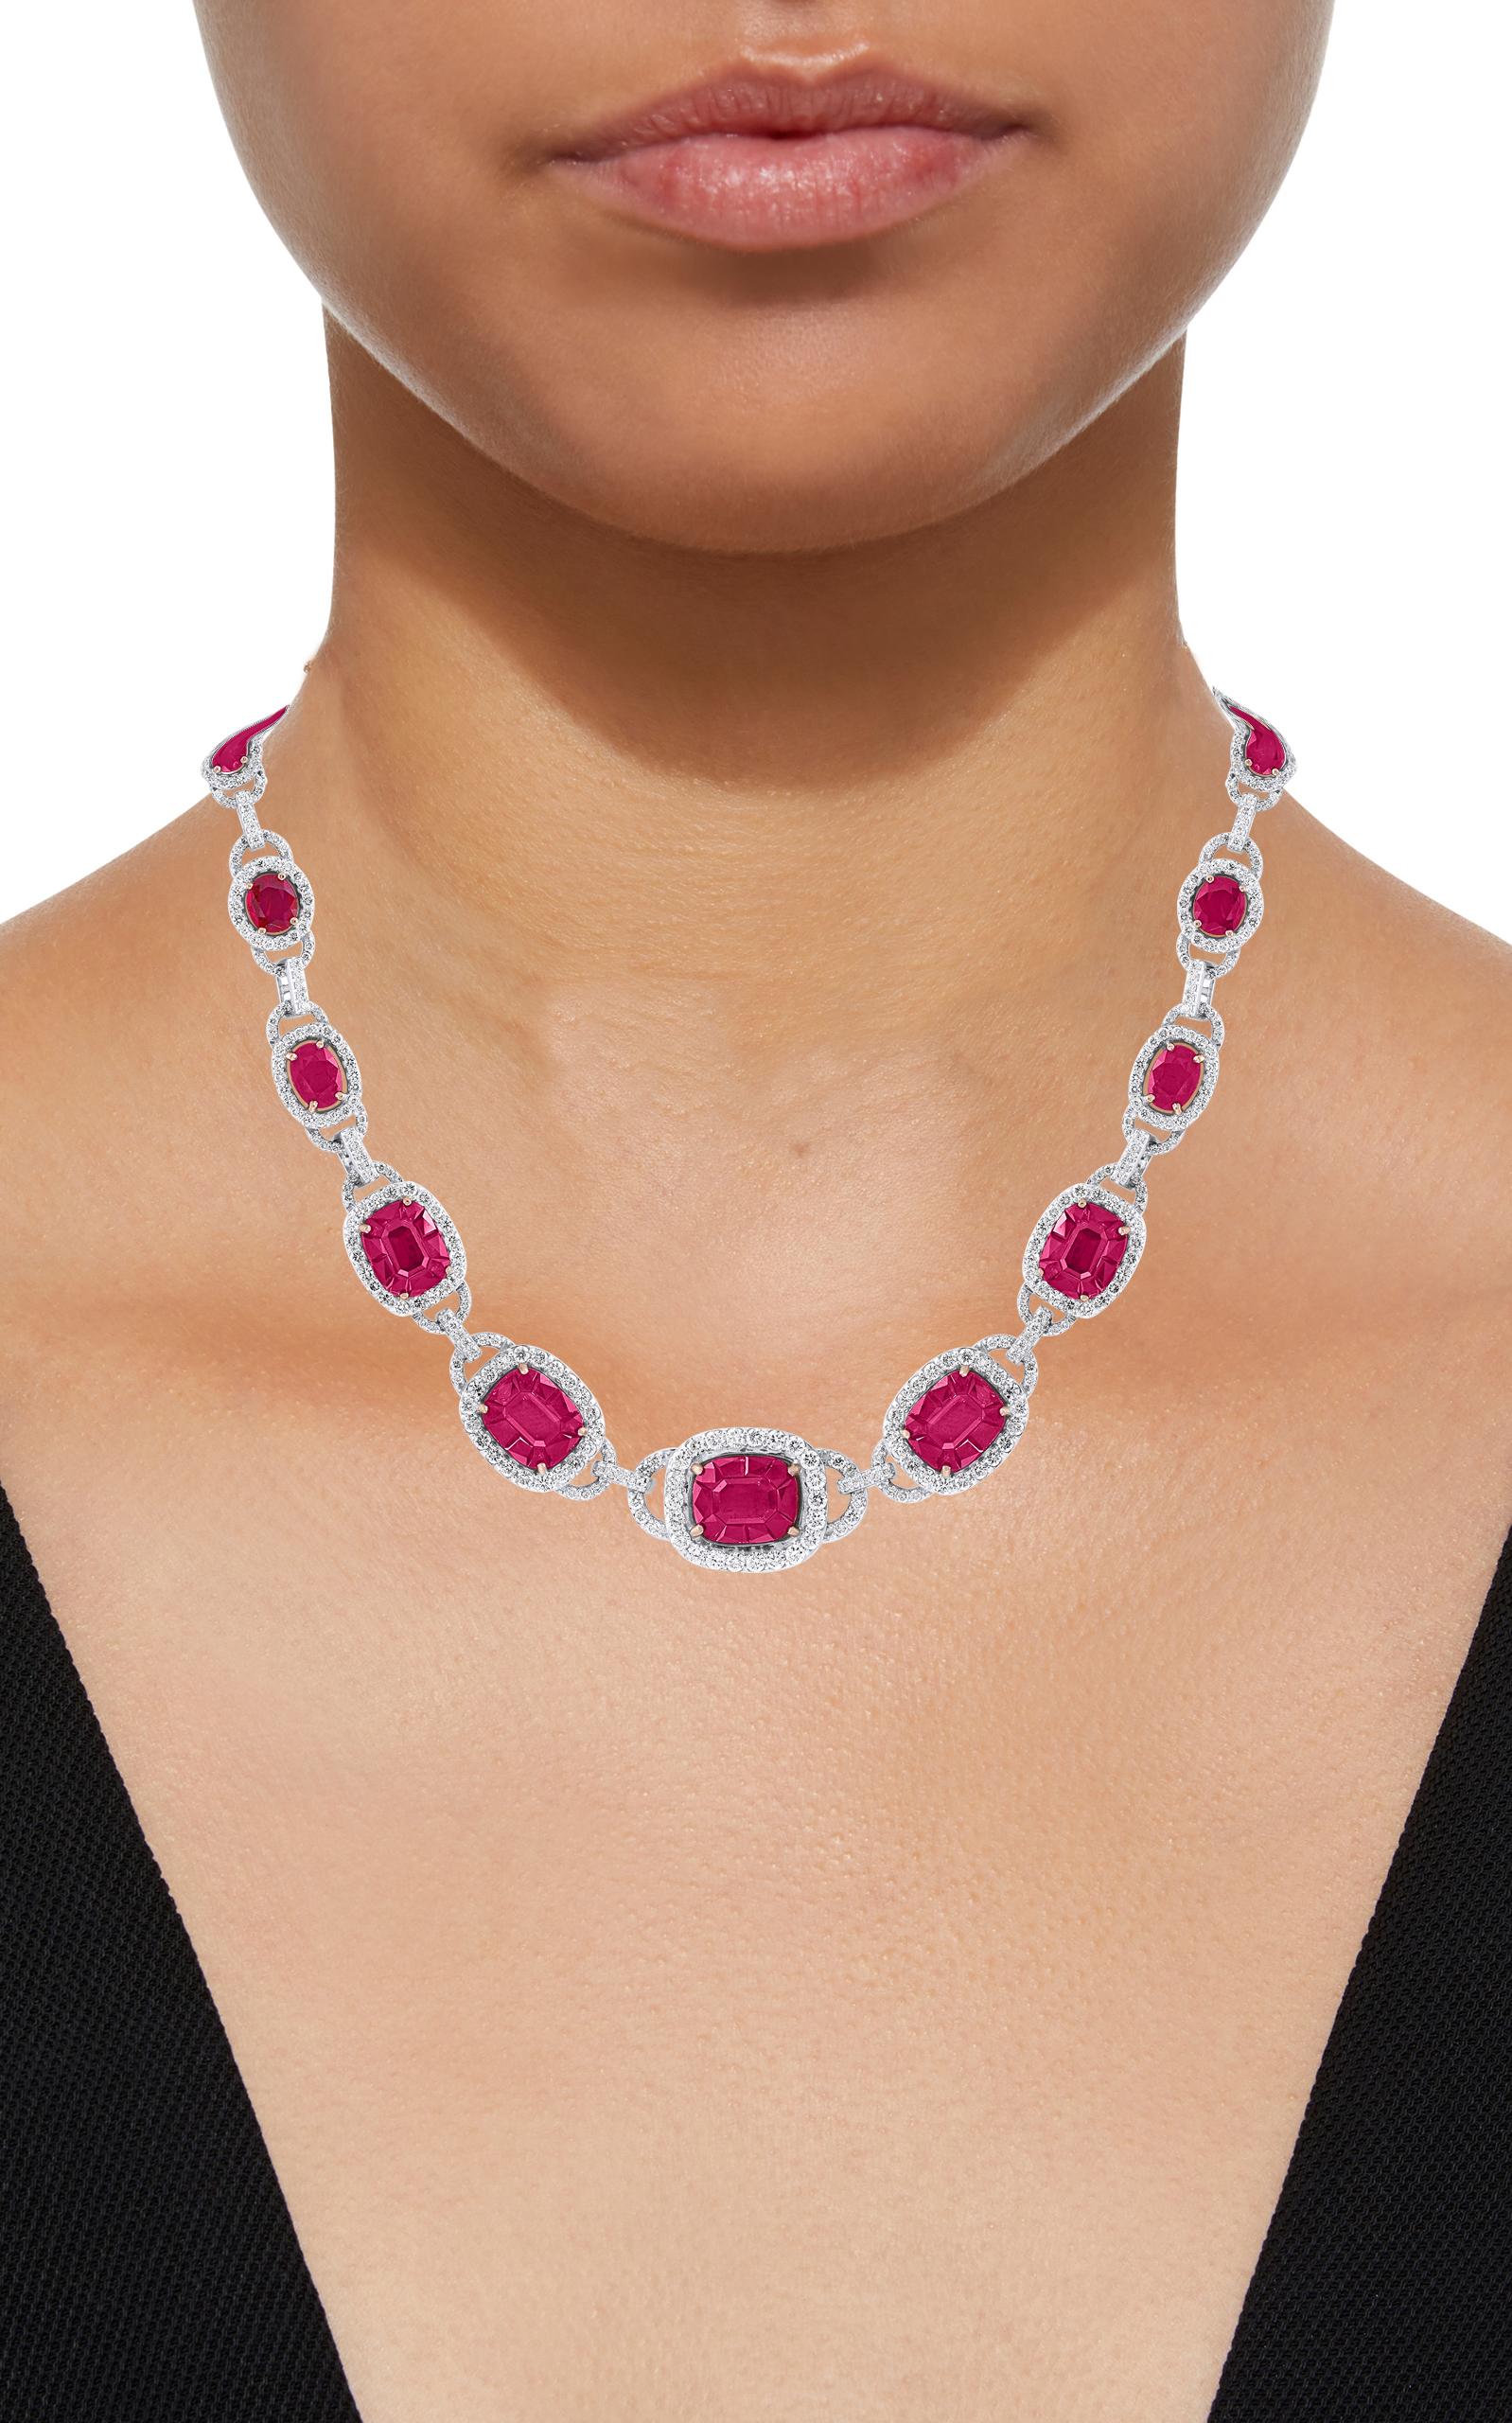 Oval Cut GIA Certified 45 Carat Natural Burma Ruby & Diamond Necklace 18 Karat White Gold For Sale